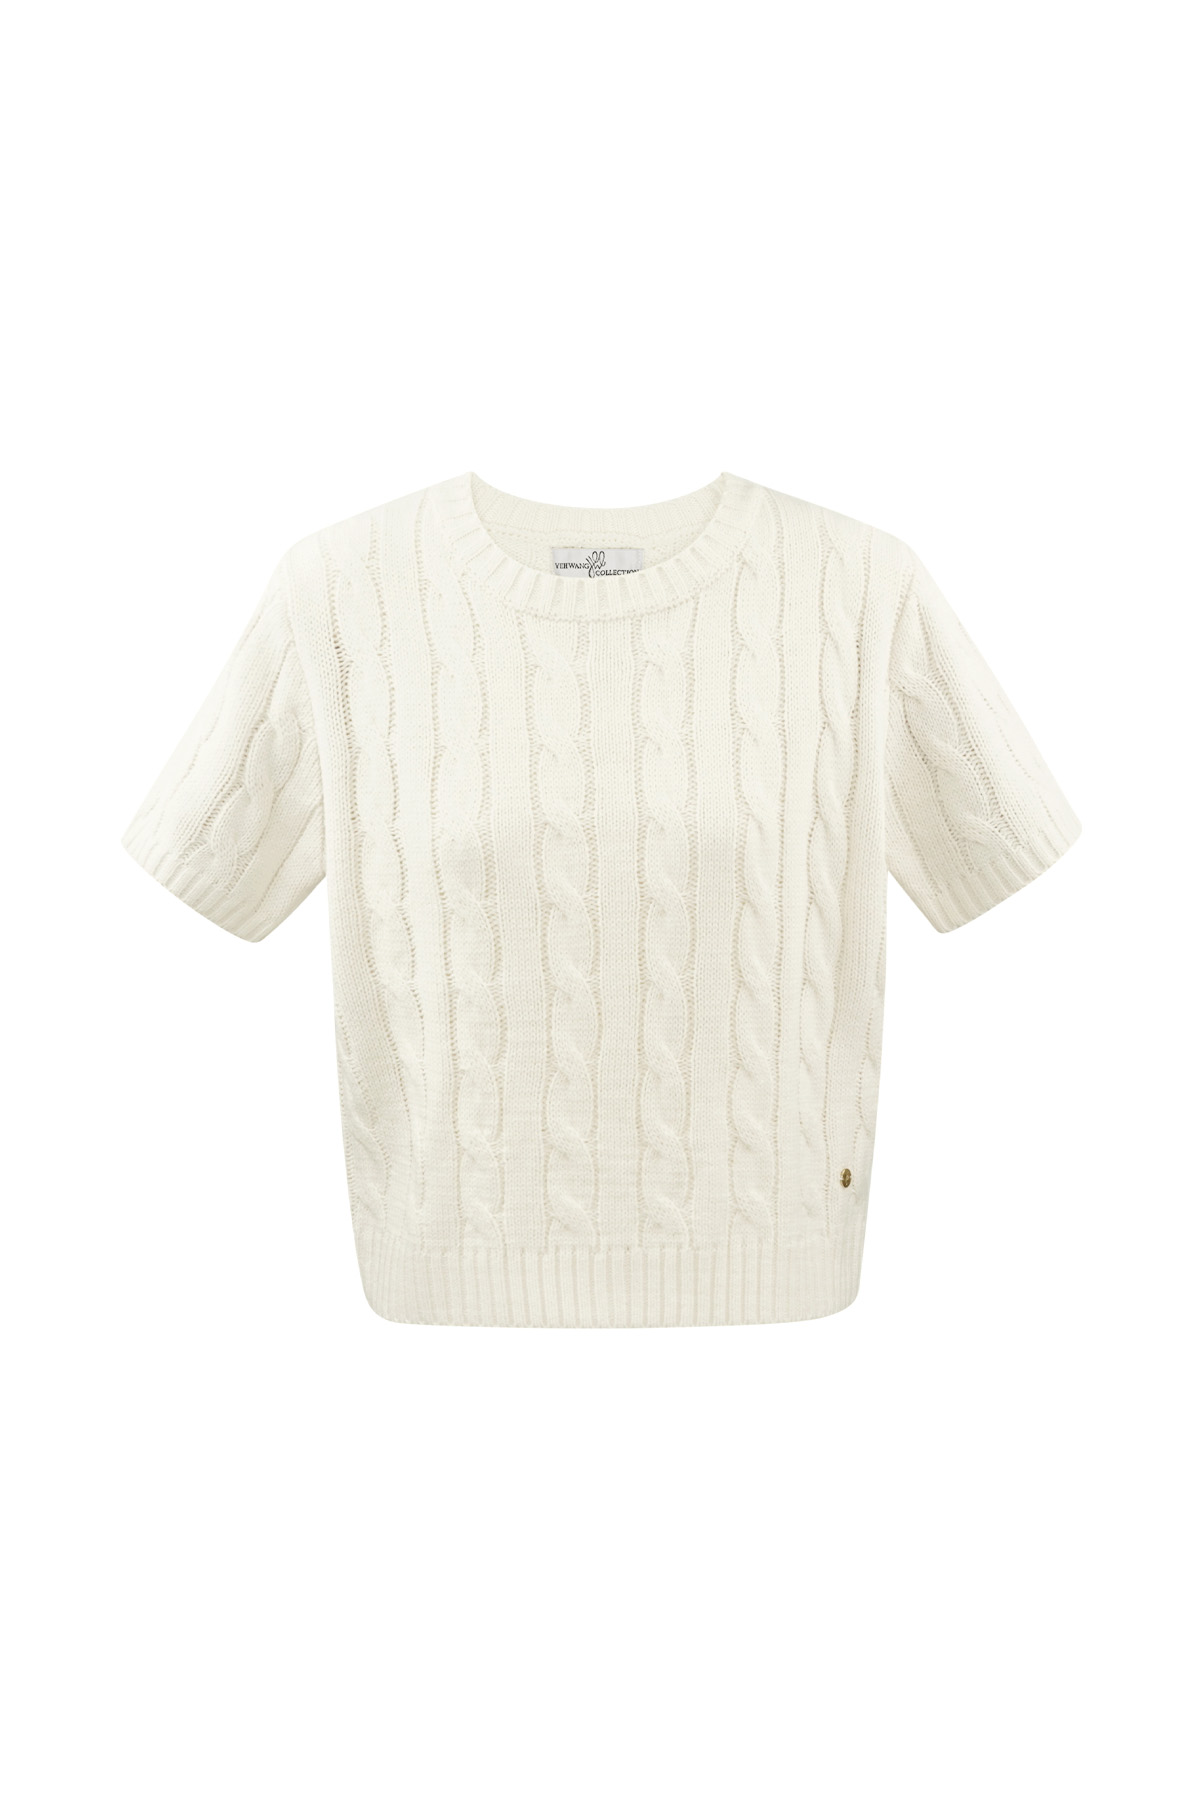 Classic knitted sweater with cables and short sleeves small/medium – off-white h5 